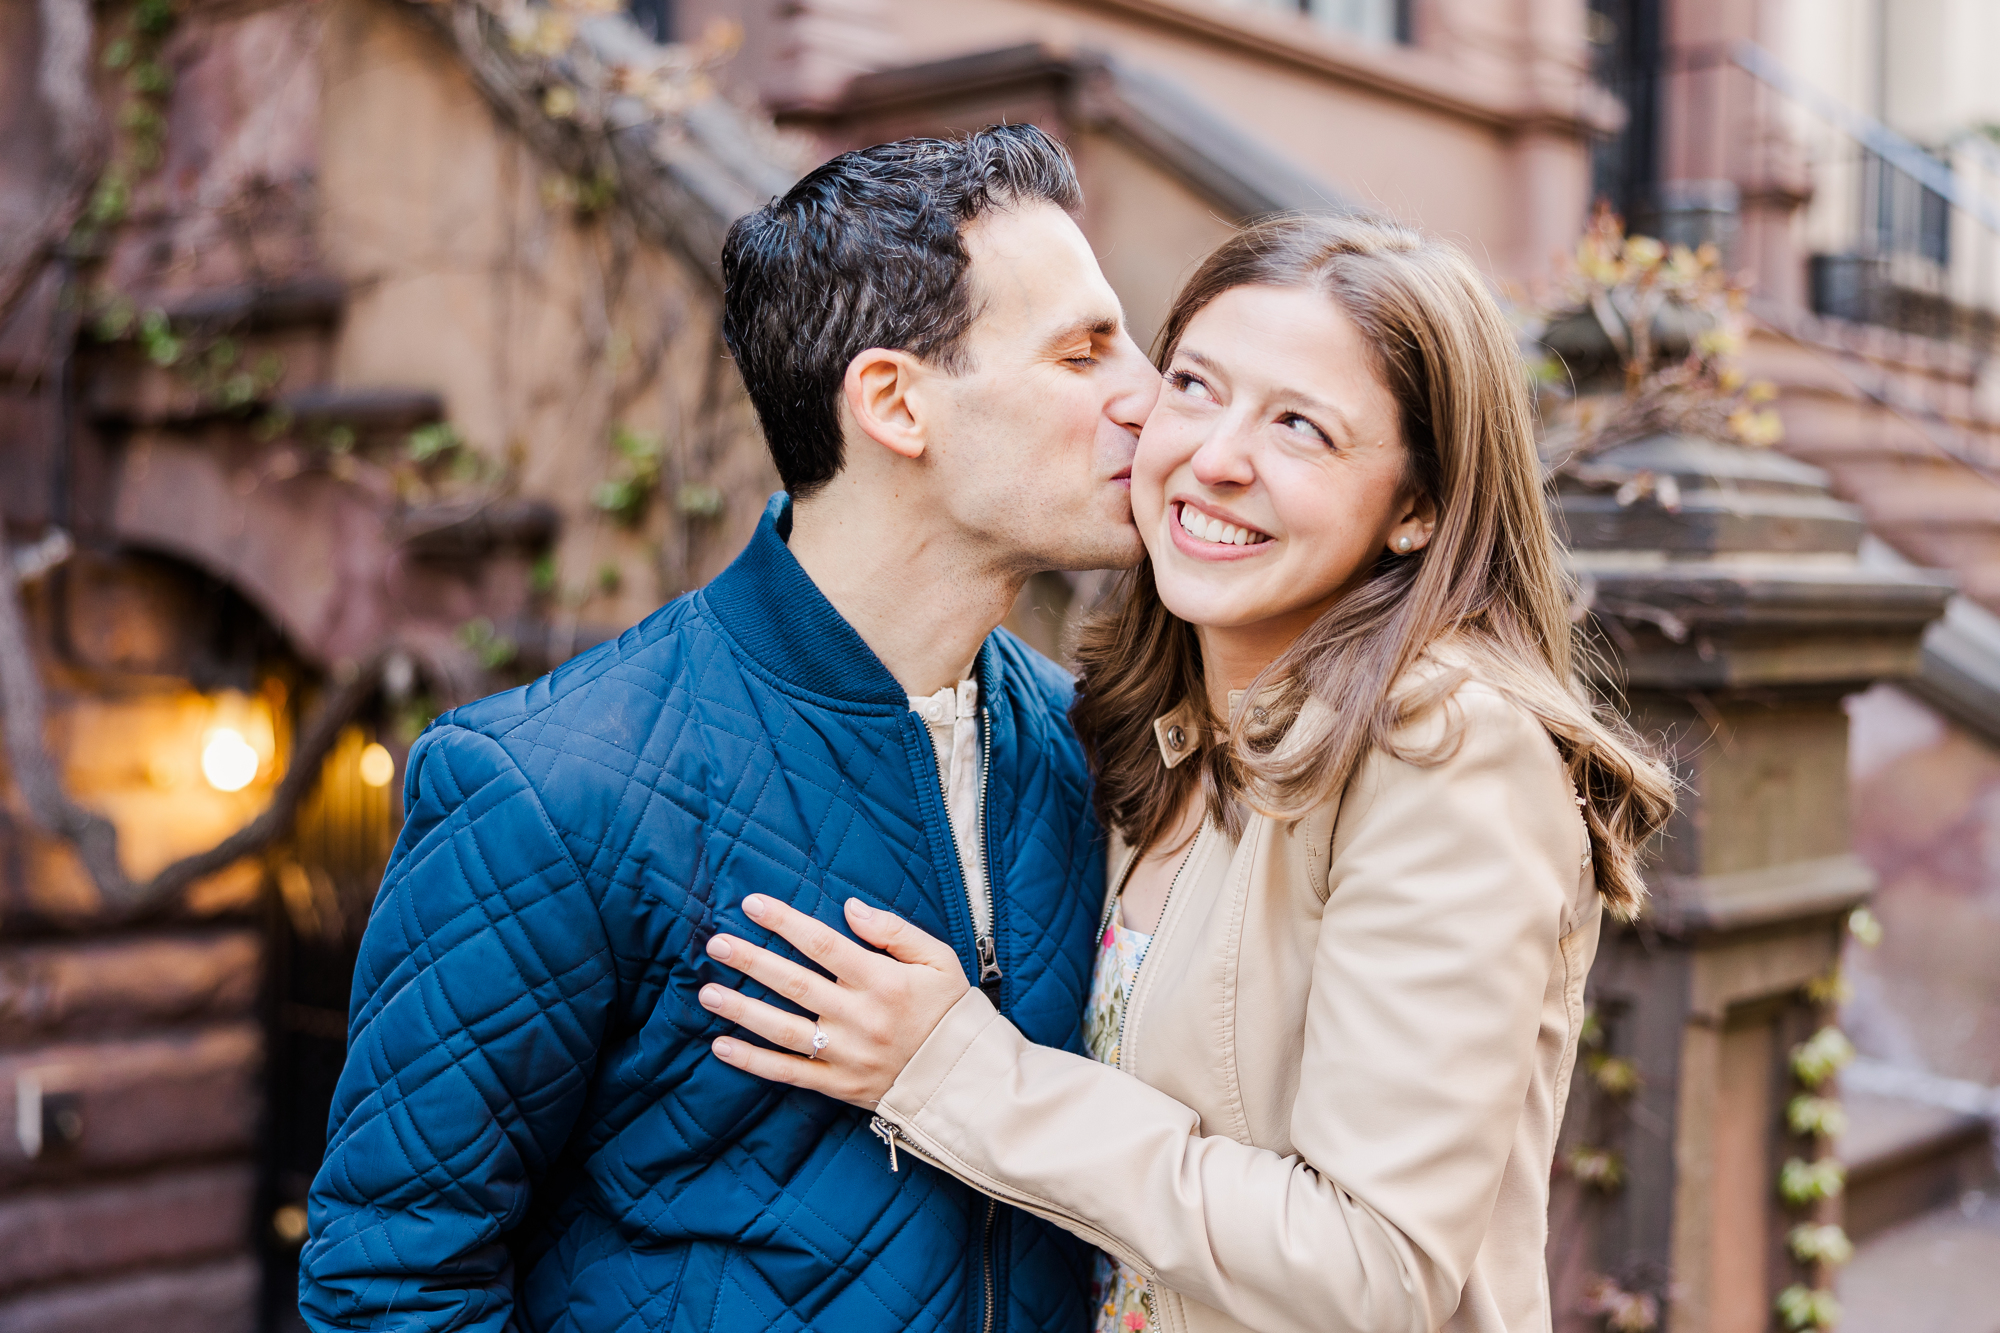 Personal Upper East Side Engagement Photo Shoot